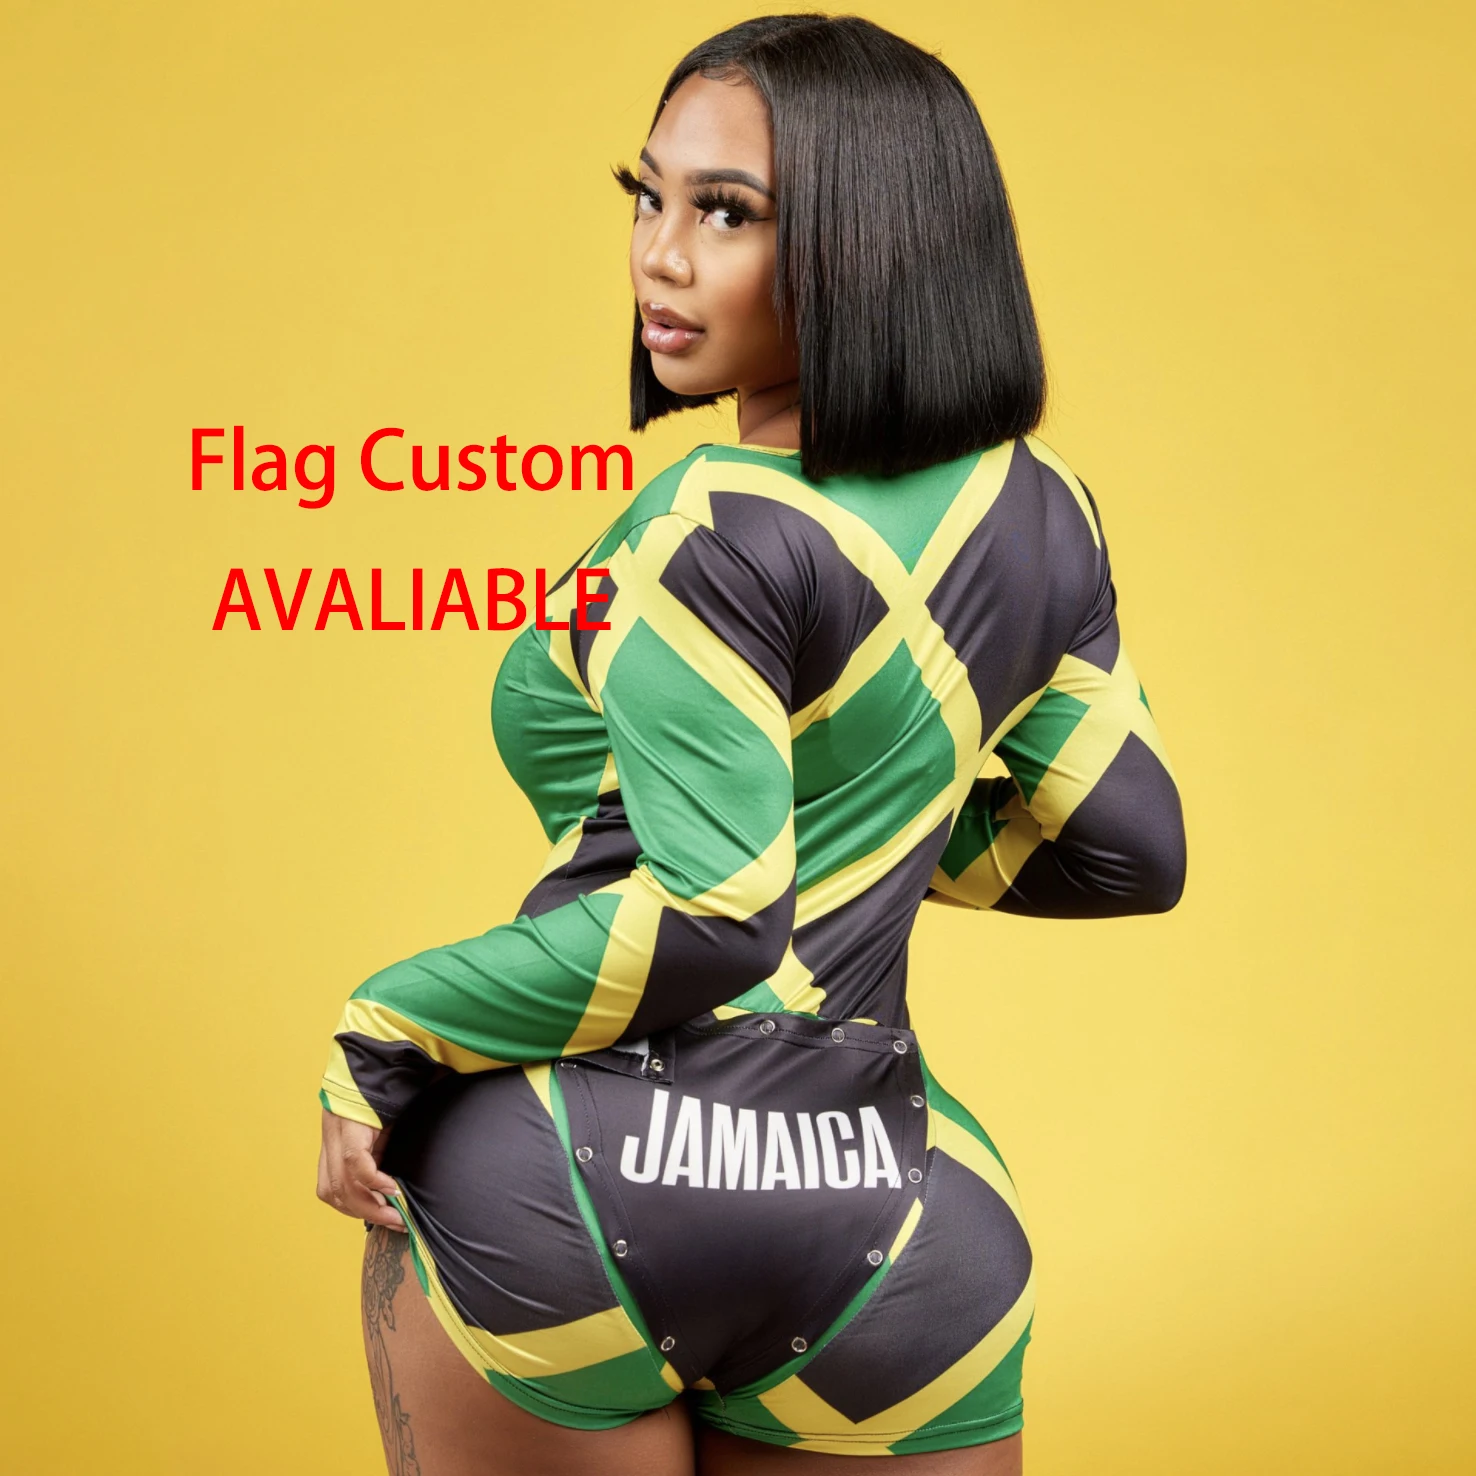 Custom Flag Design Jamaica Plus Size High Stretch Long Sleeve Jamaican Haiti Puerto Rico African Shorts With Butt Flap - Buy Onesie With Flap,Flag Onesie,Jamaican Onesie on Alibaba.com